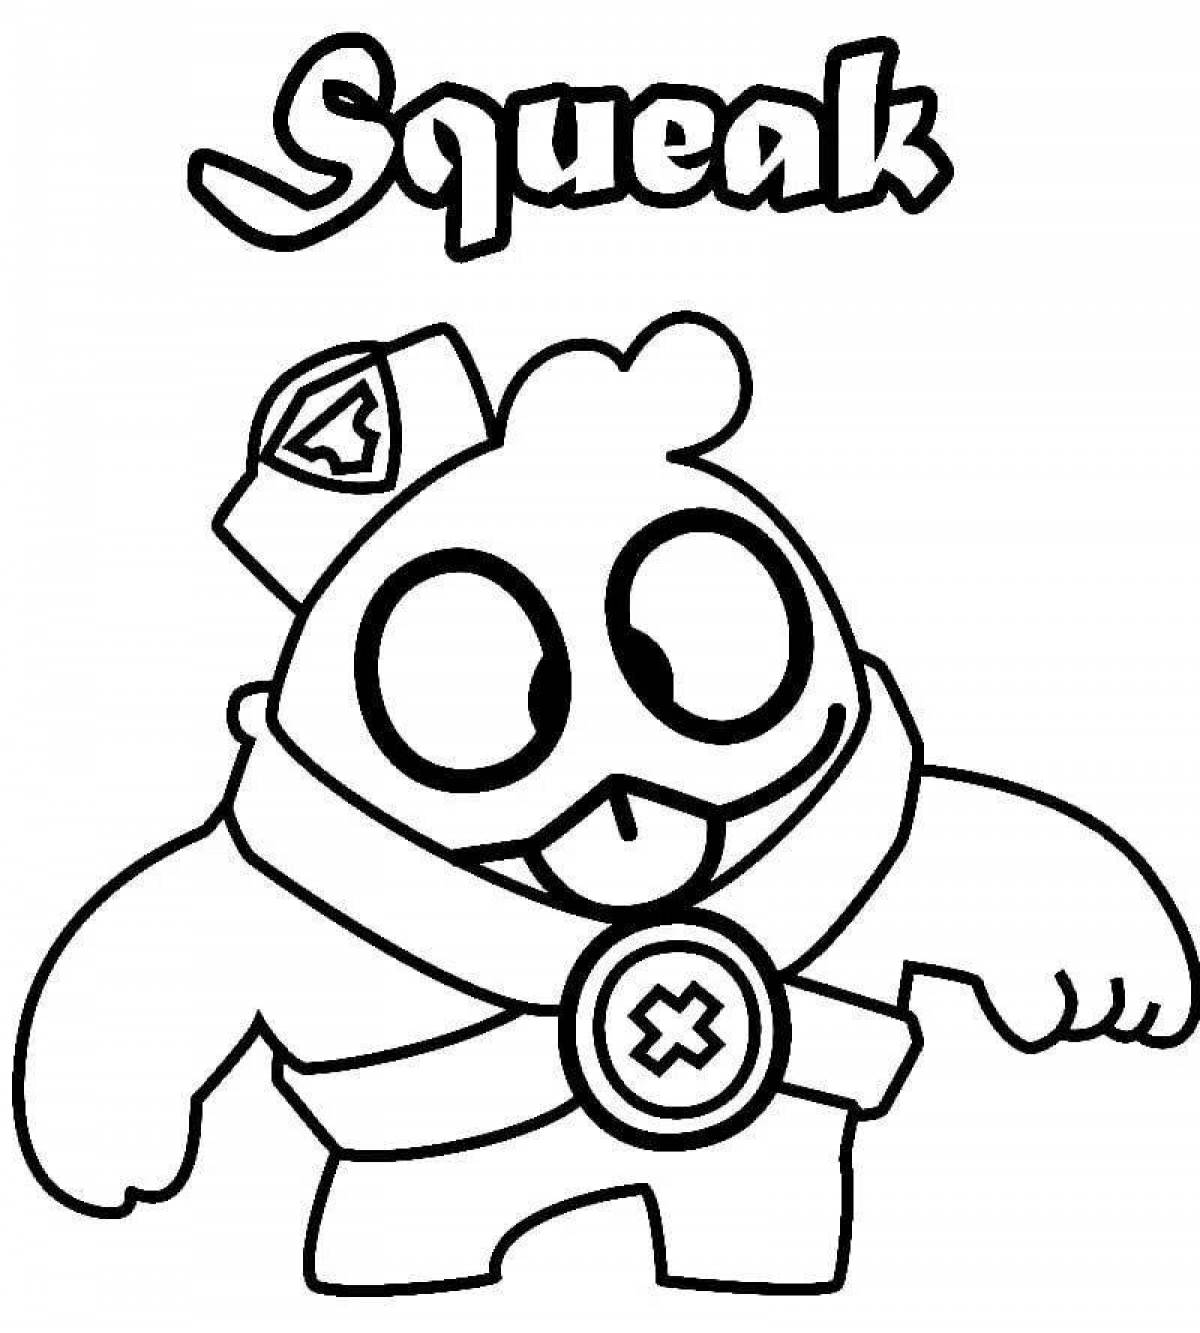 Incredible buster brawl stars coloring page